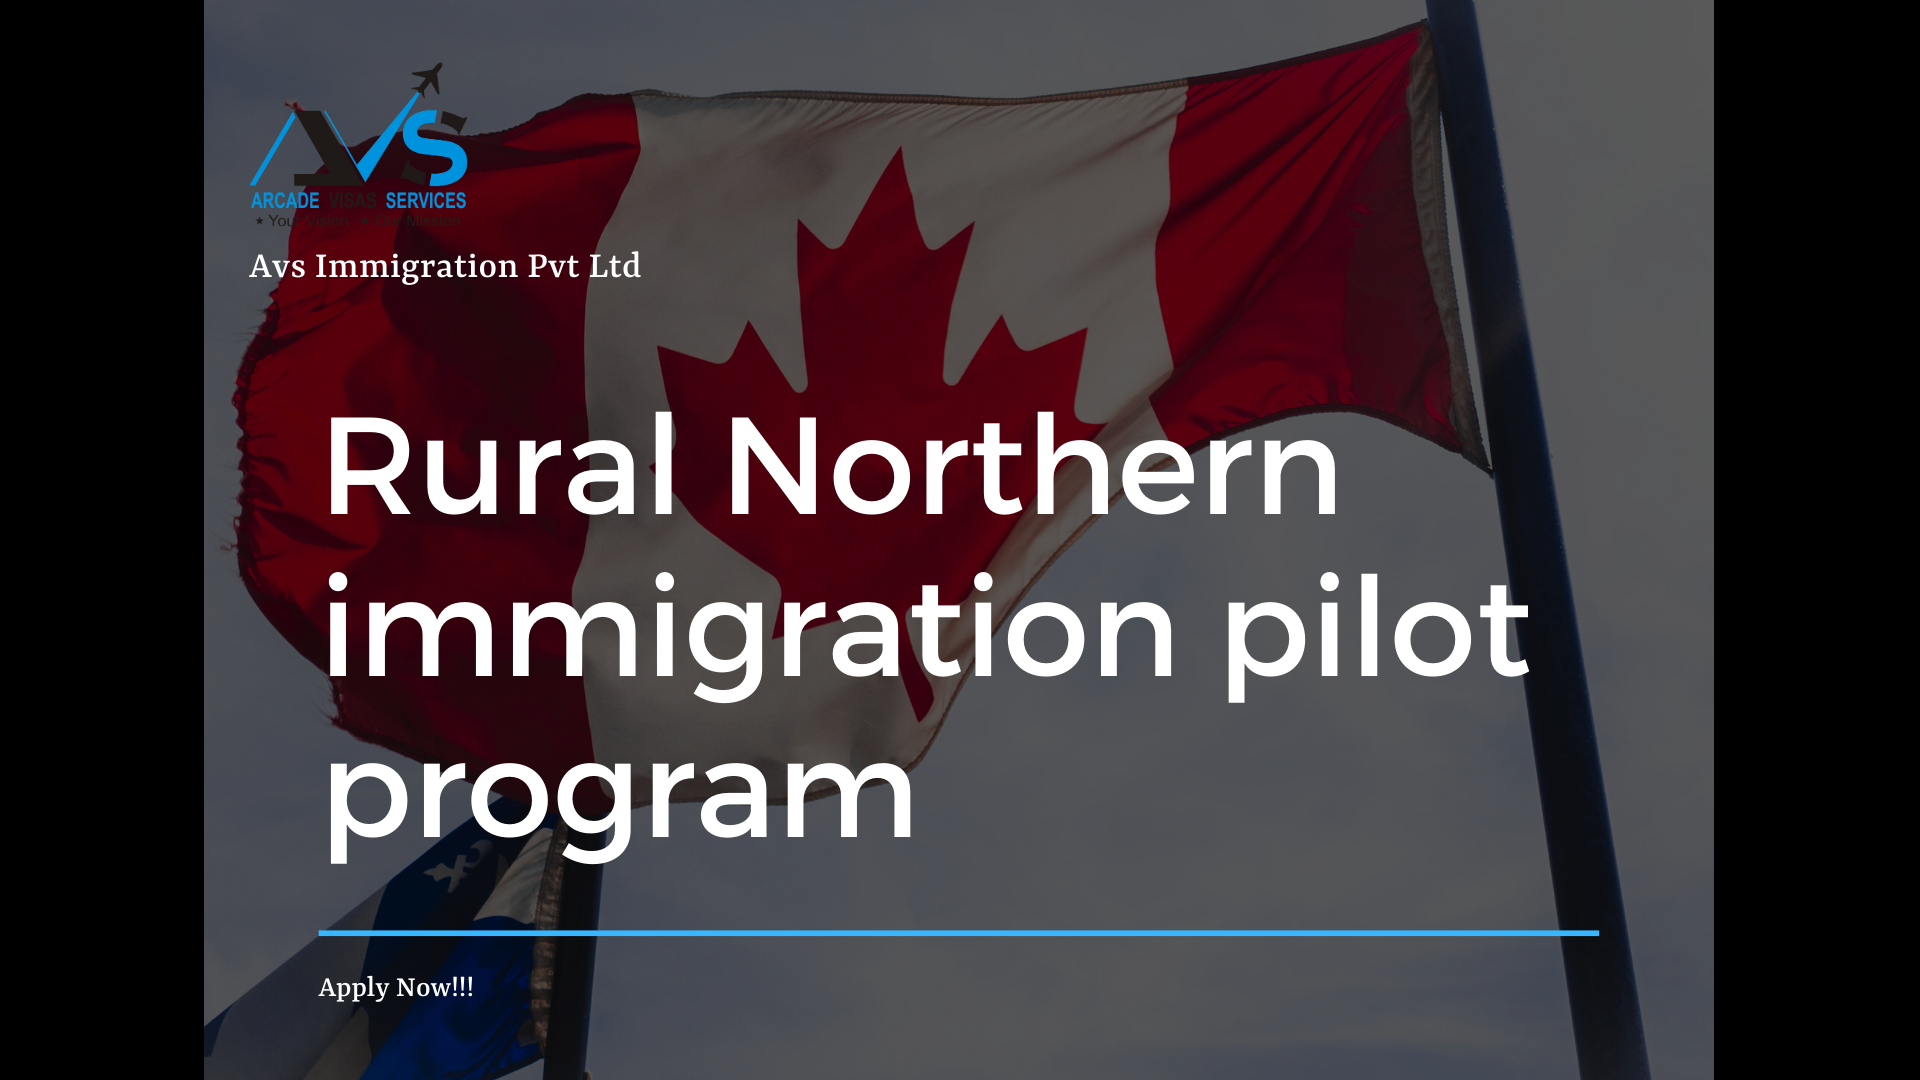 Rural and Northern immigration pilot program